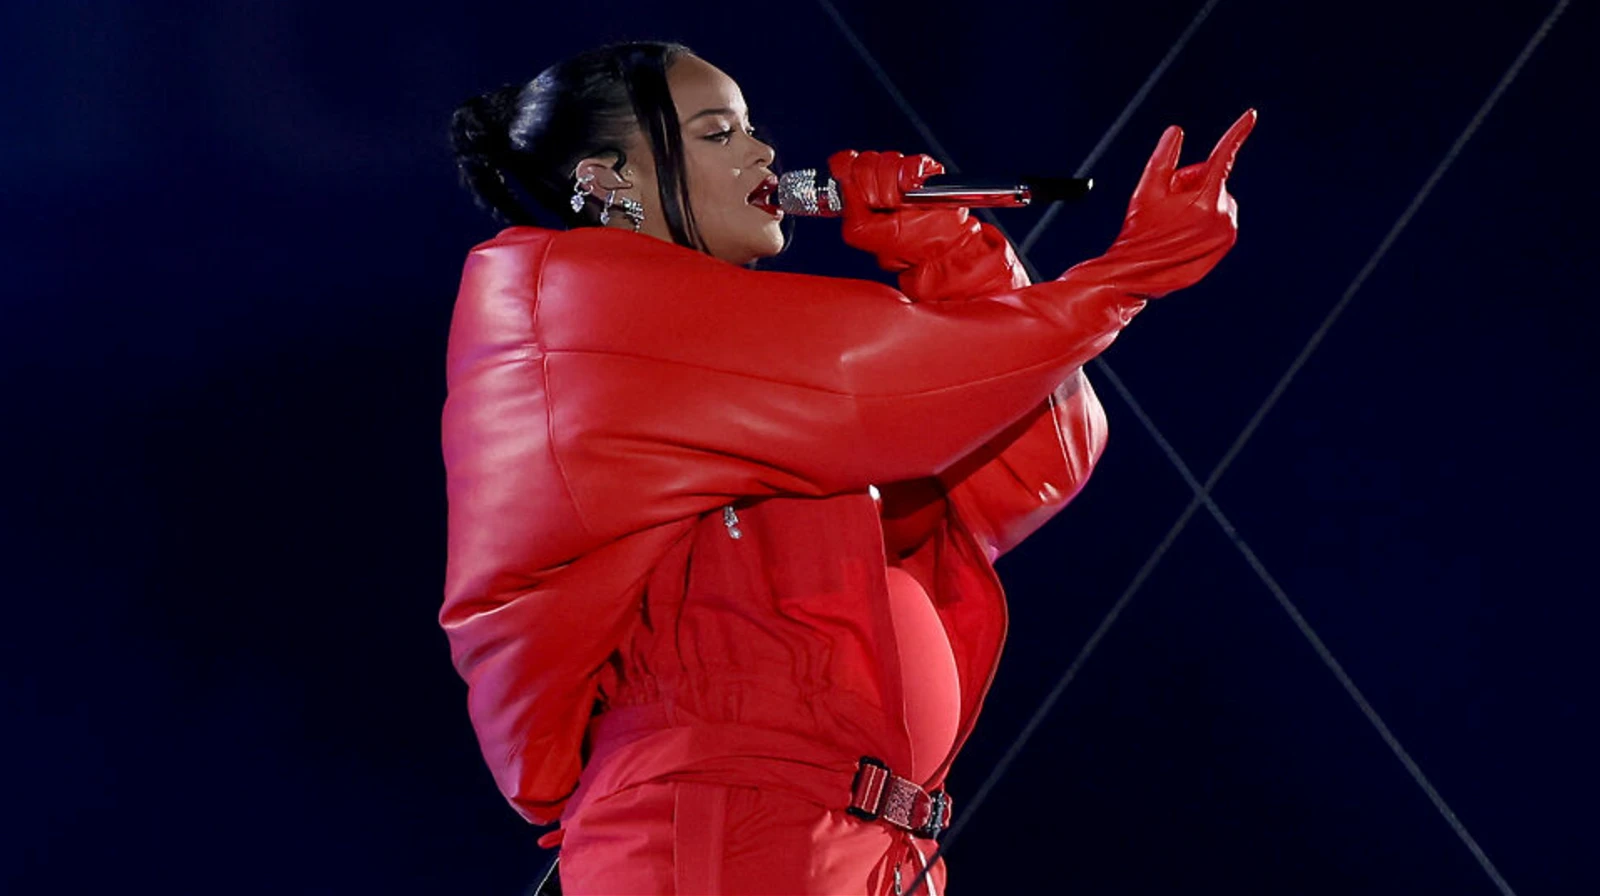 Rihanna with her baby bump during her Super Bowl performance